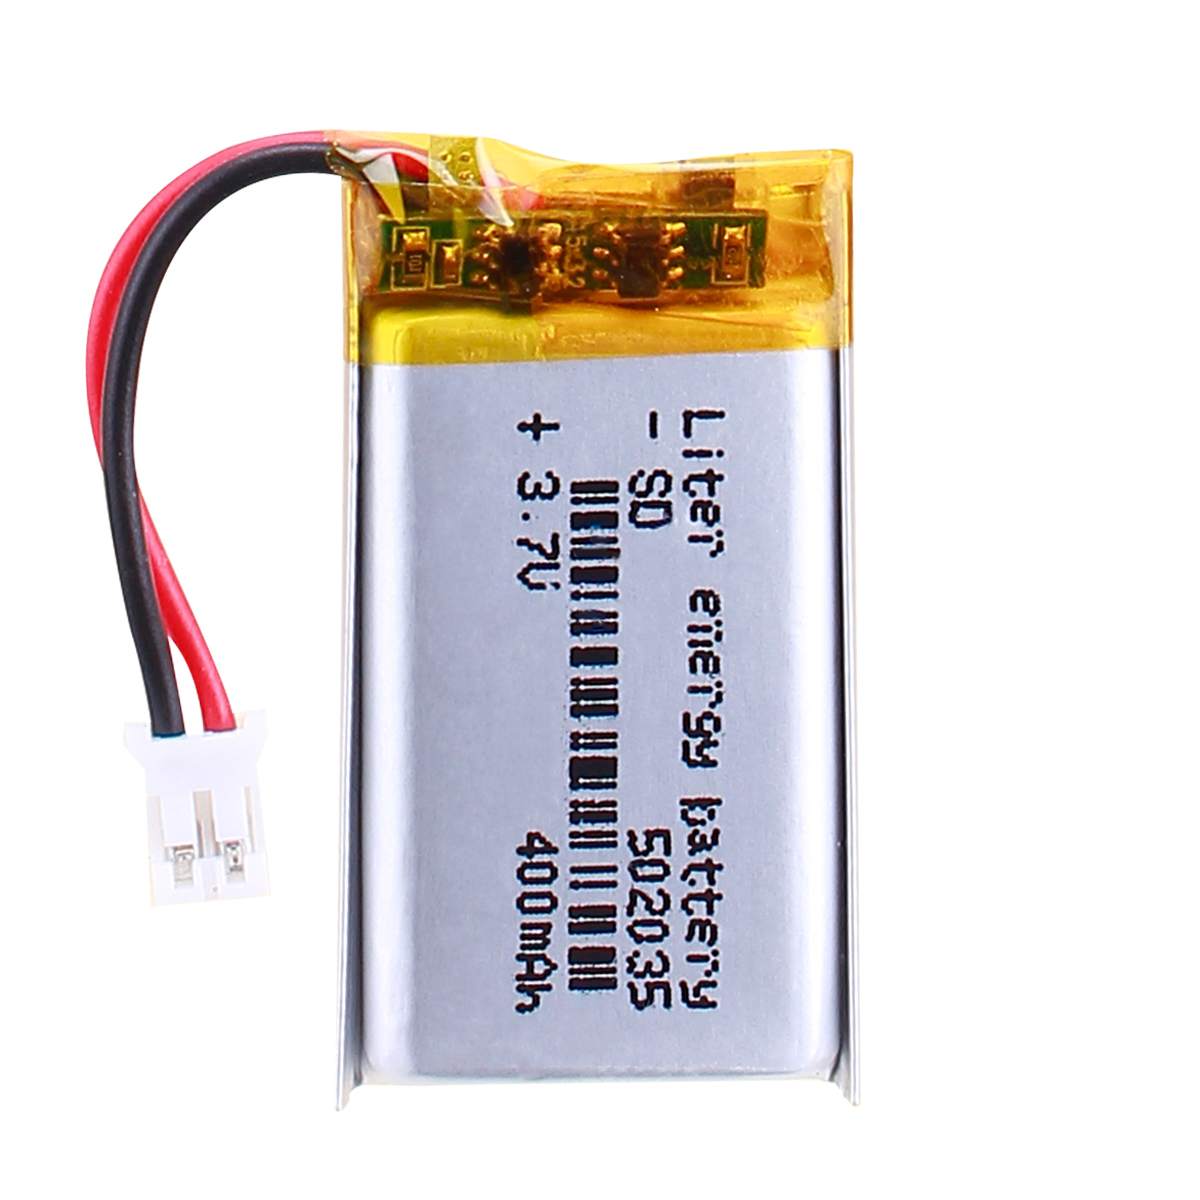 100pcs Lithium Polymer Battery liter 502035 3.7V 400mAh With PCM & Wires